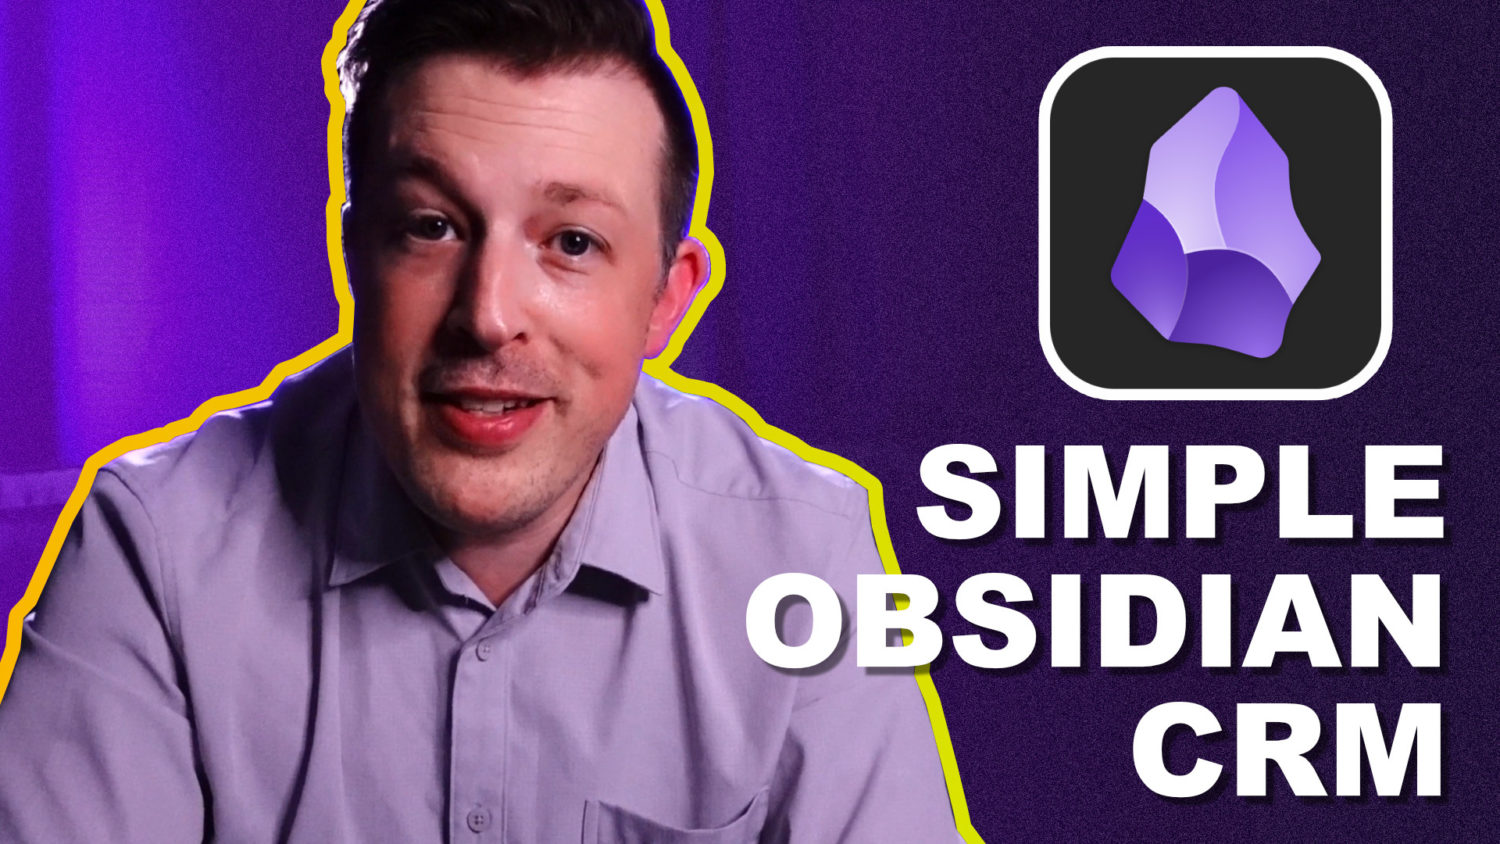 How To Build A Simple & Powerful CRM With Obsidian For Solopreneurs